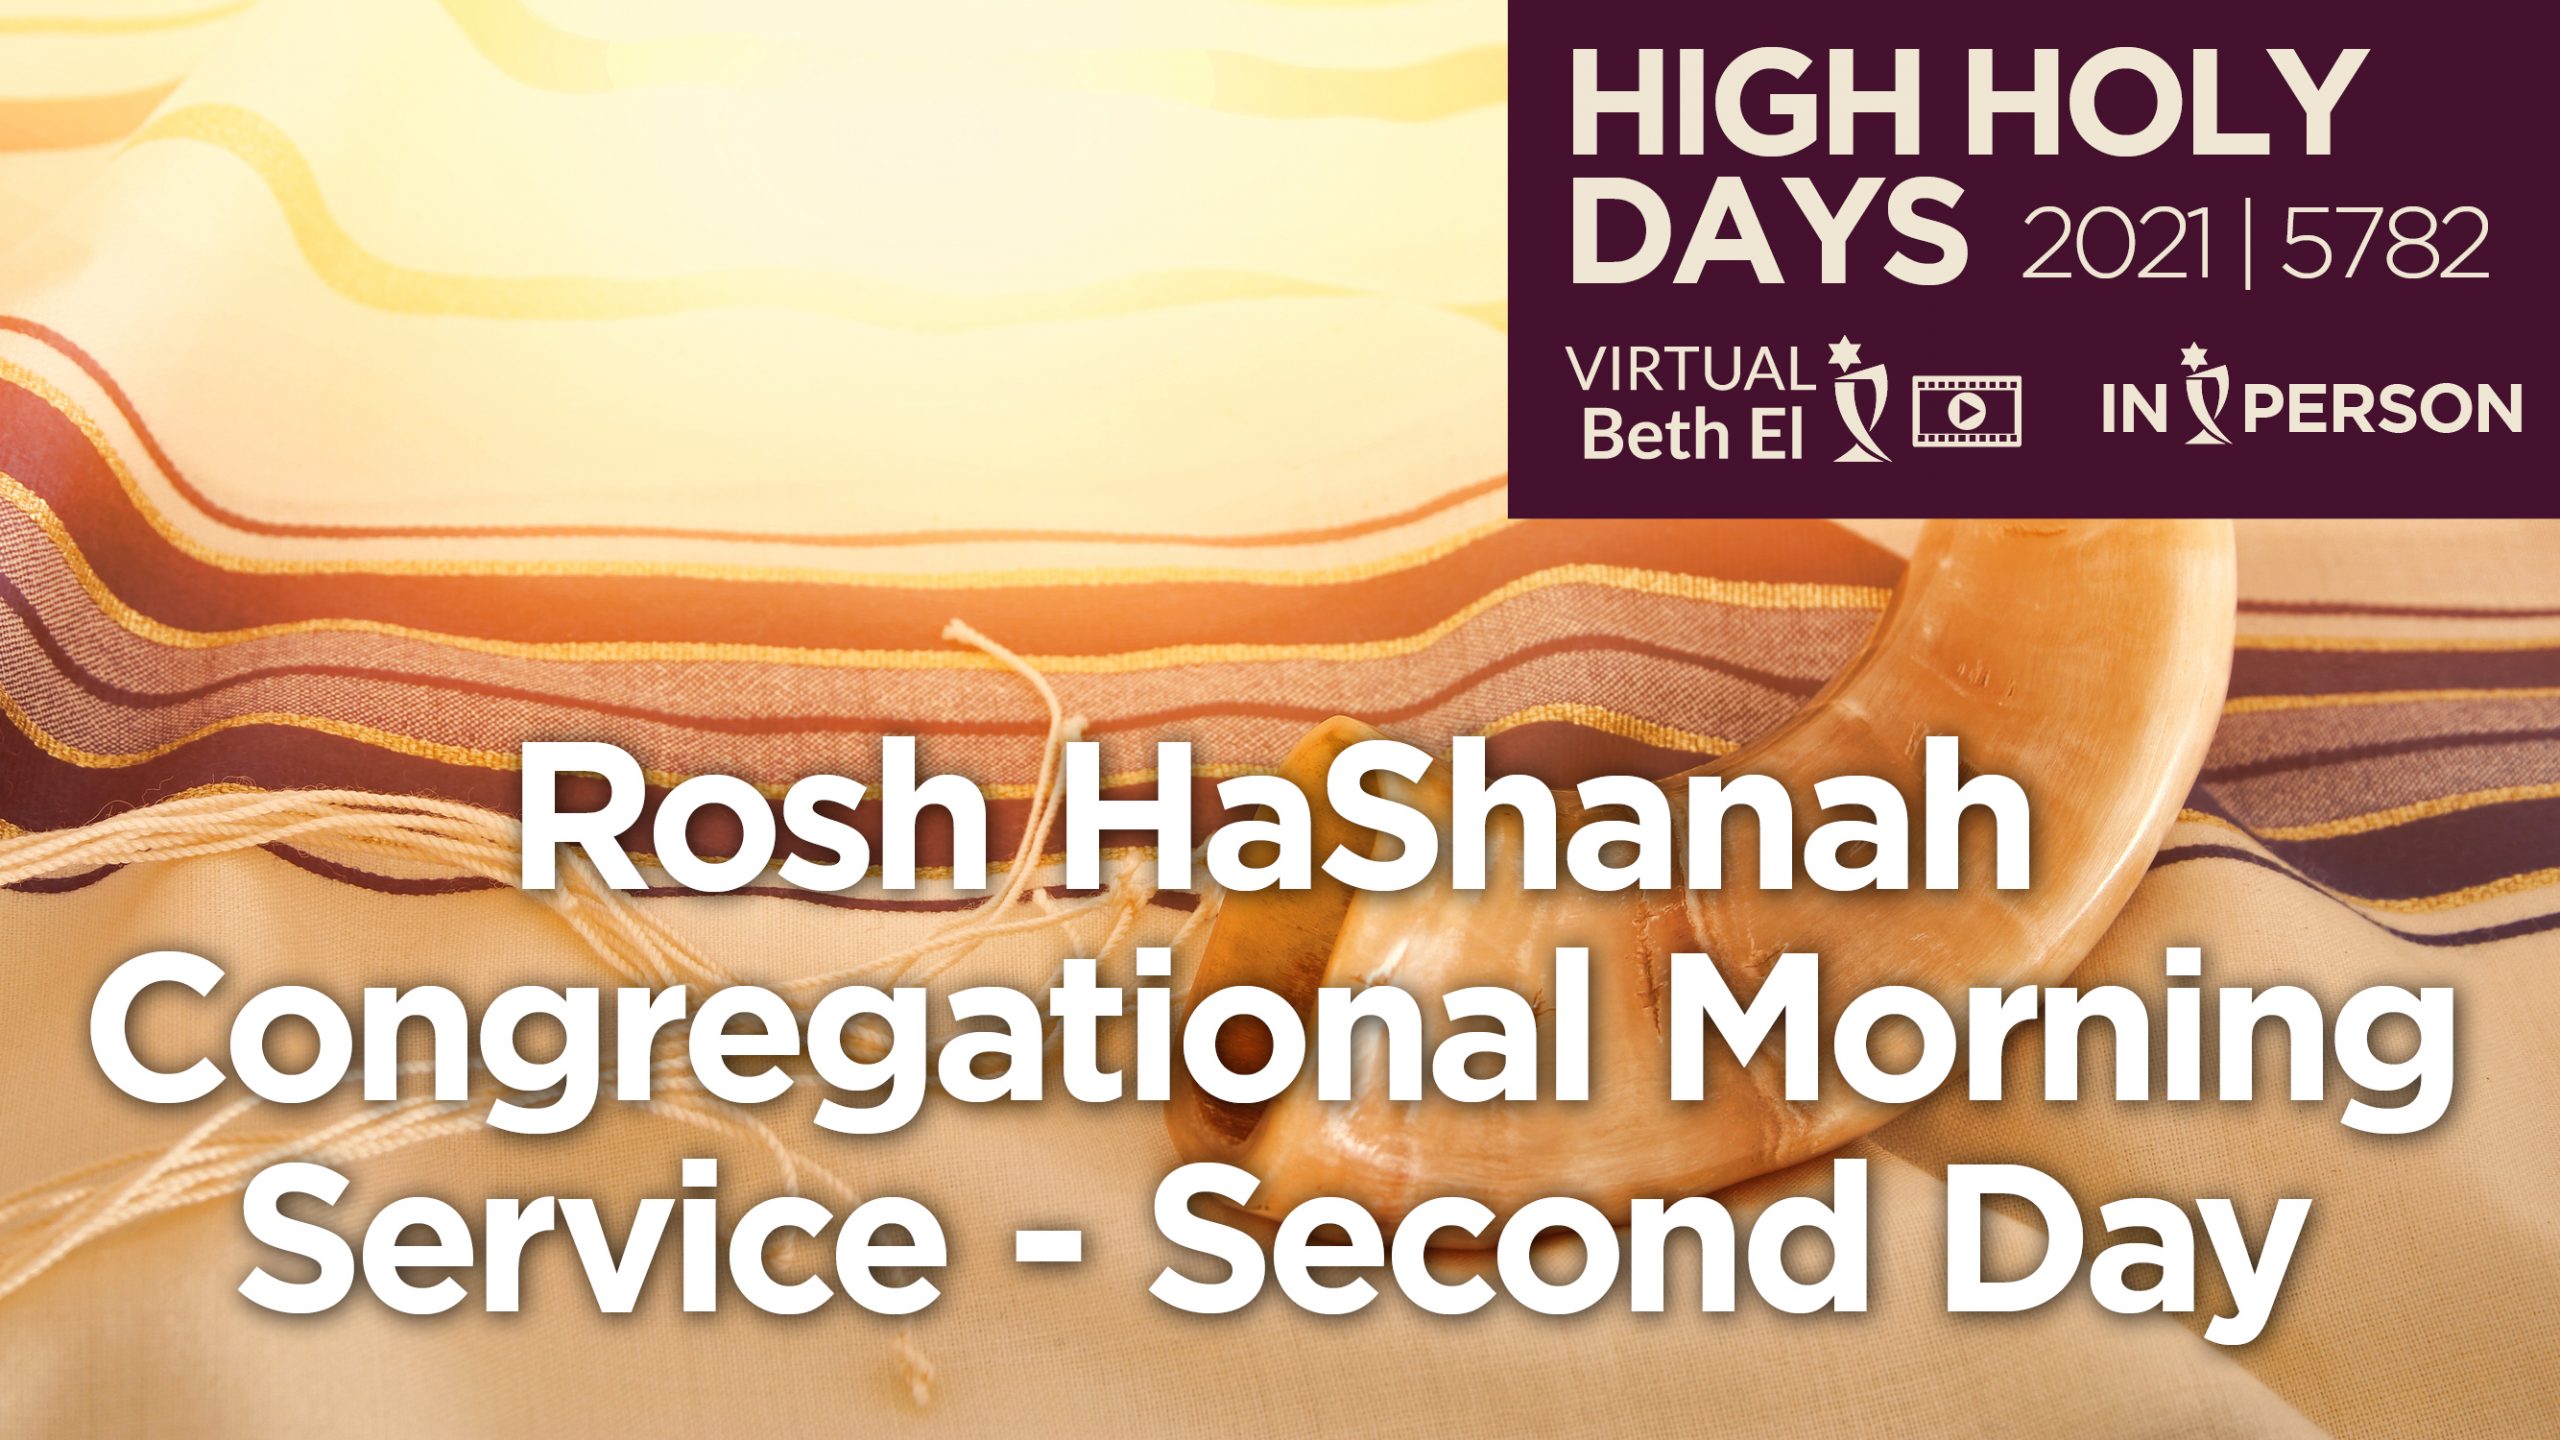 Rosh HaShanah Services Announcement Graphic for 2021 5782